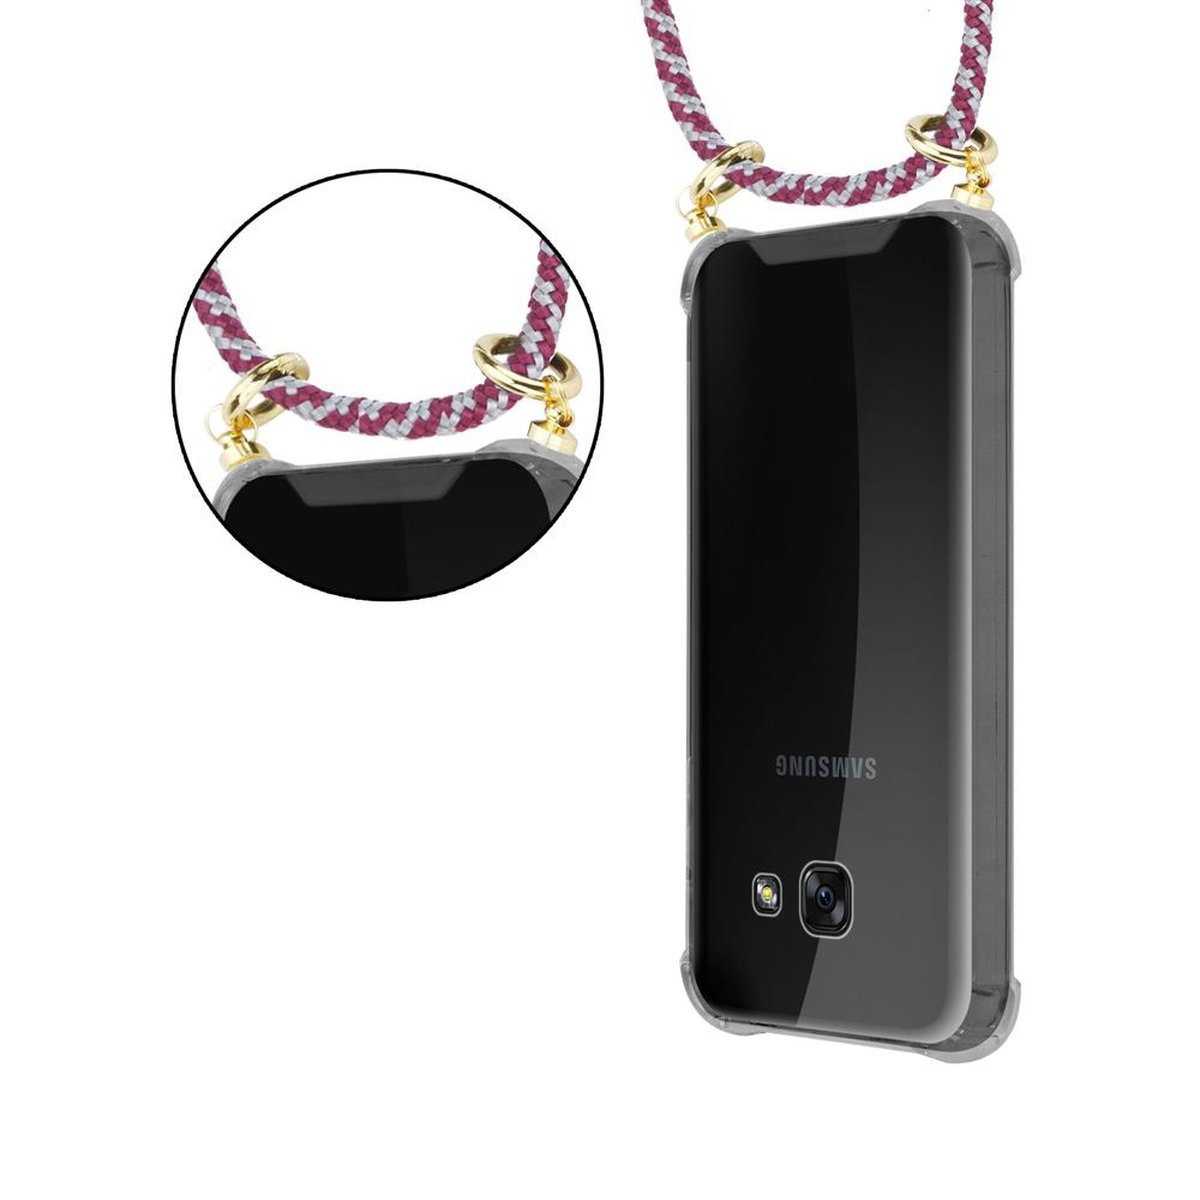 Ringen, Hülle, abnehmbarer Kordel Galaxy Samsung, ROT Backcover, mit 2017, A3 Handy Kette und WEIß Band Gold CADORABO